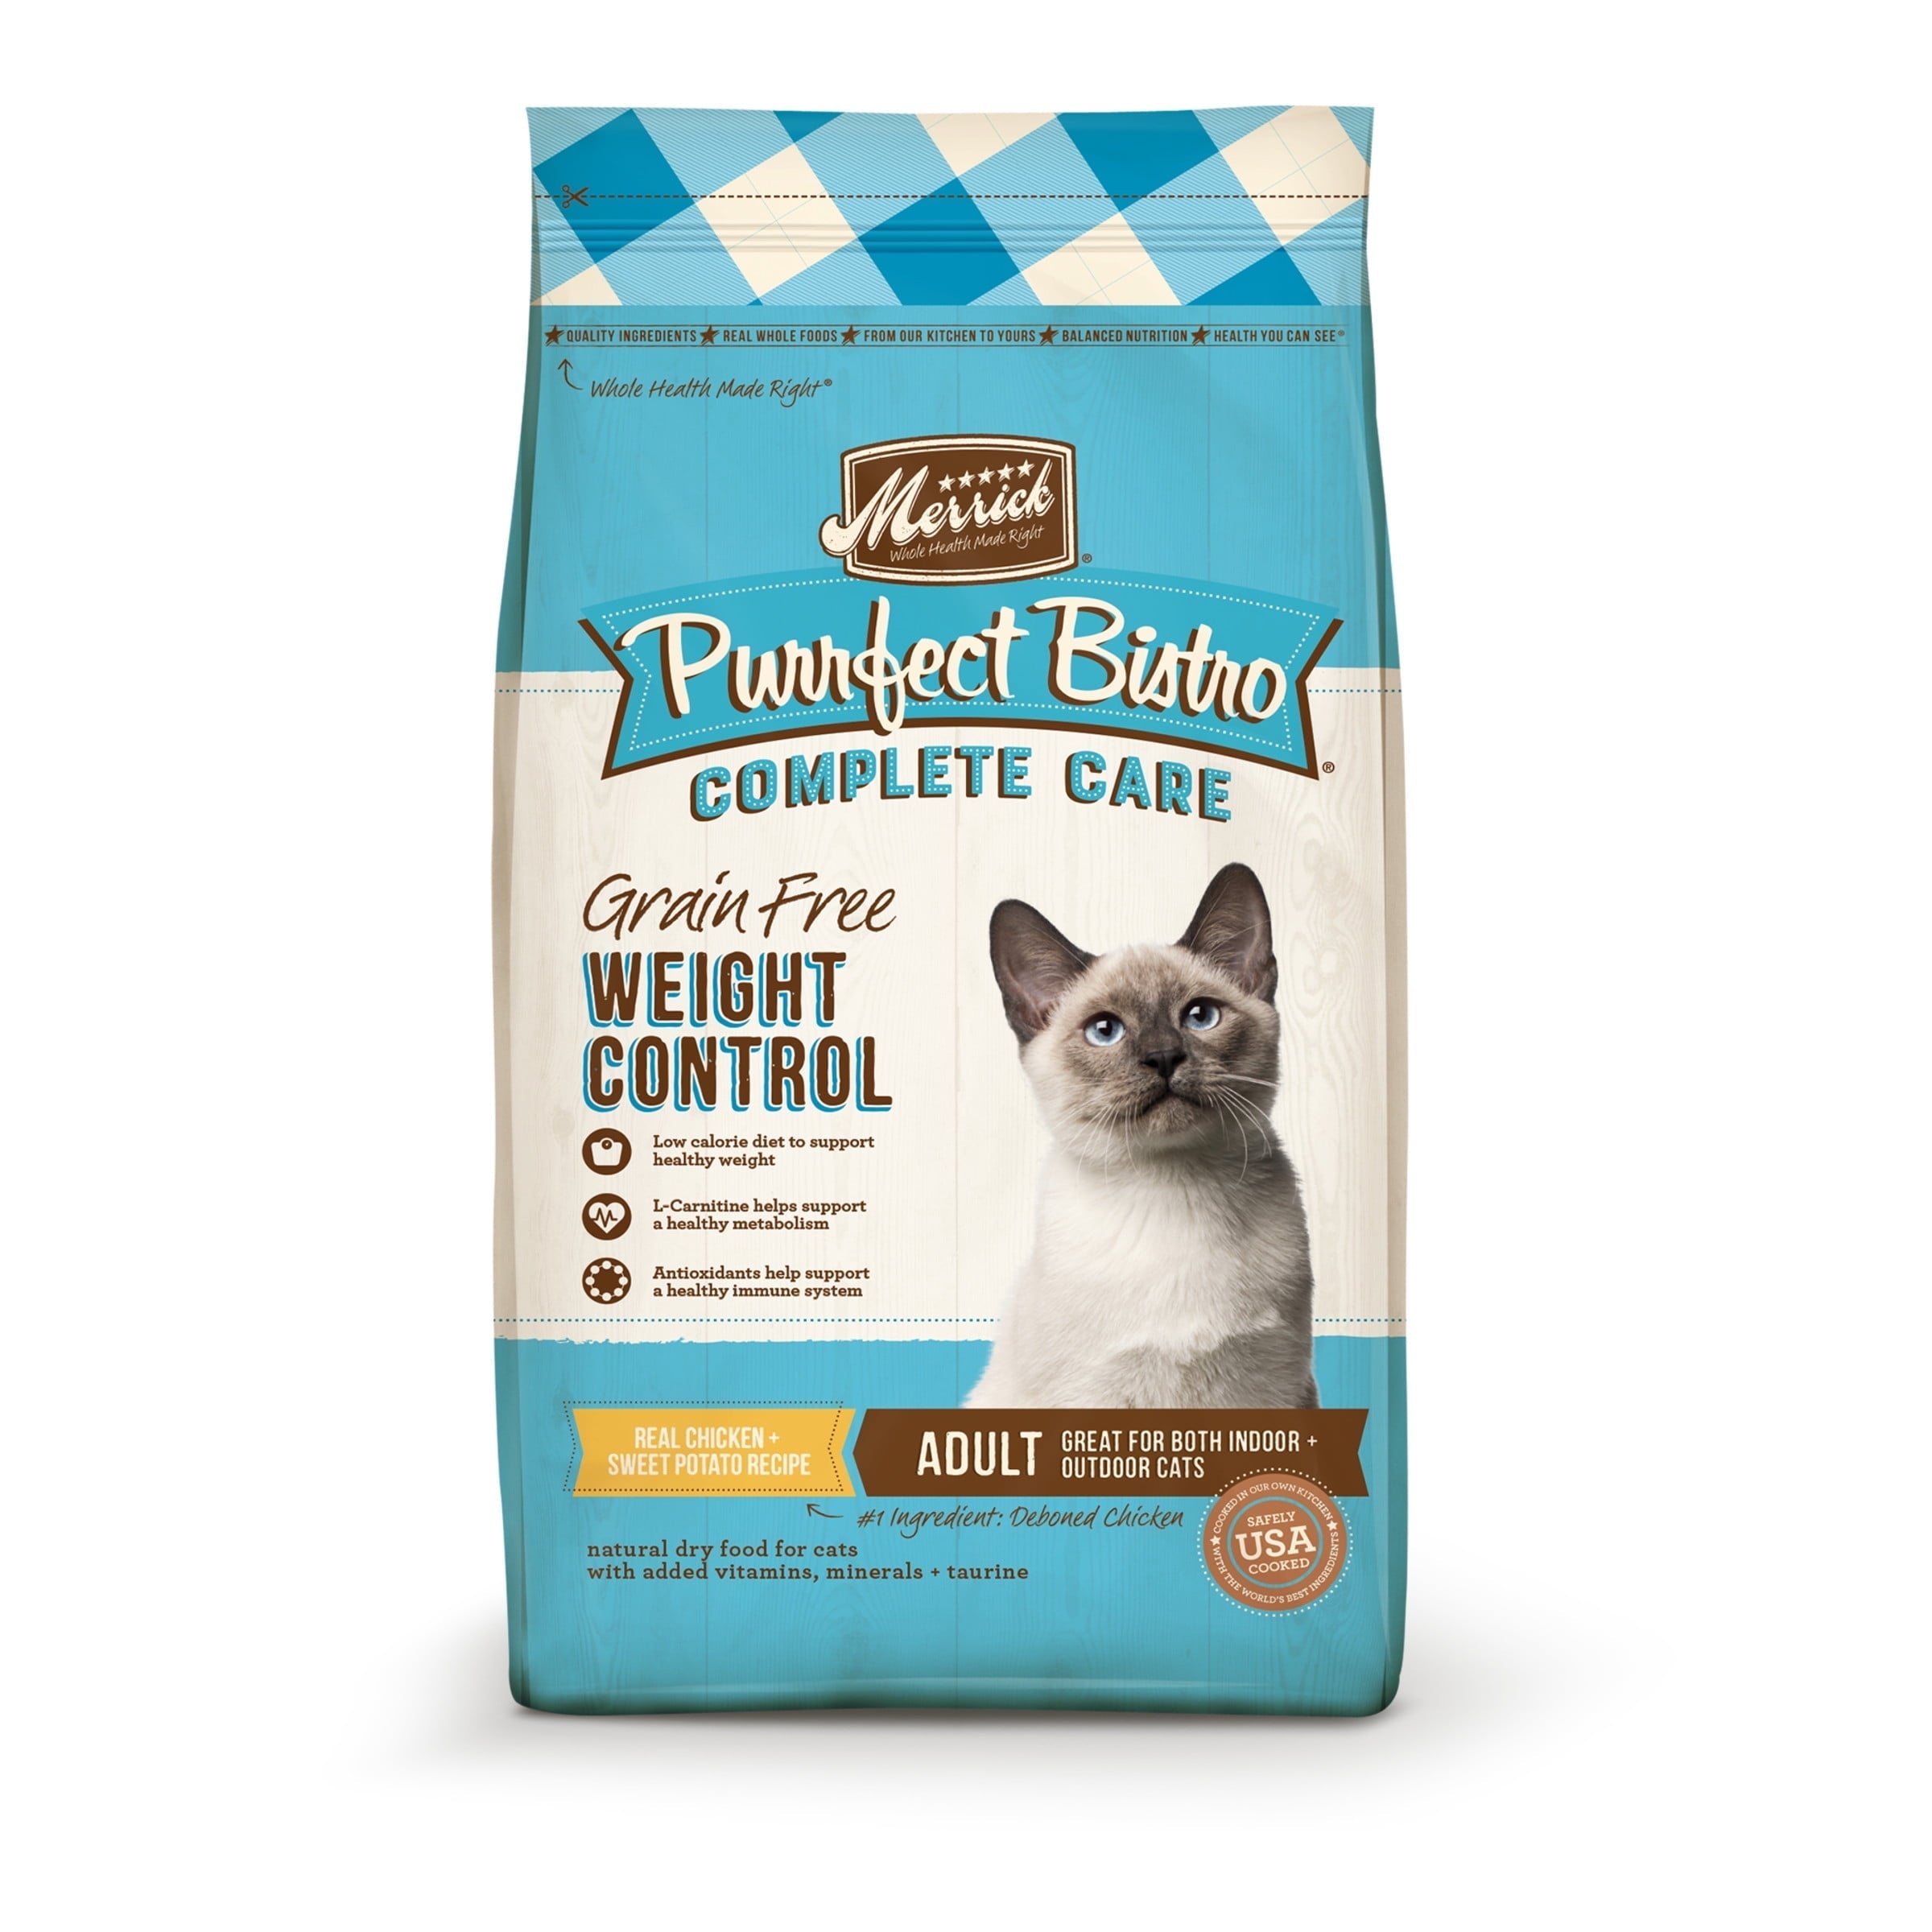 Wholesale prices with free shipping all over United States Merrick Purrfect Bistro Grain Free Cat Food, Complete Care Weight Control Dry Cat Food Recipe - 7 lb Bag - Steven Deals